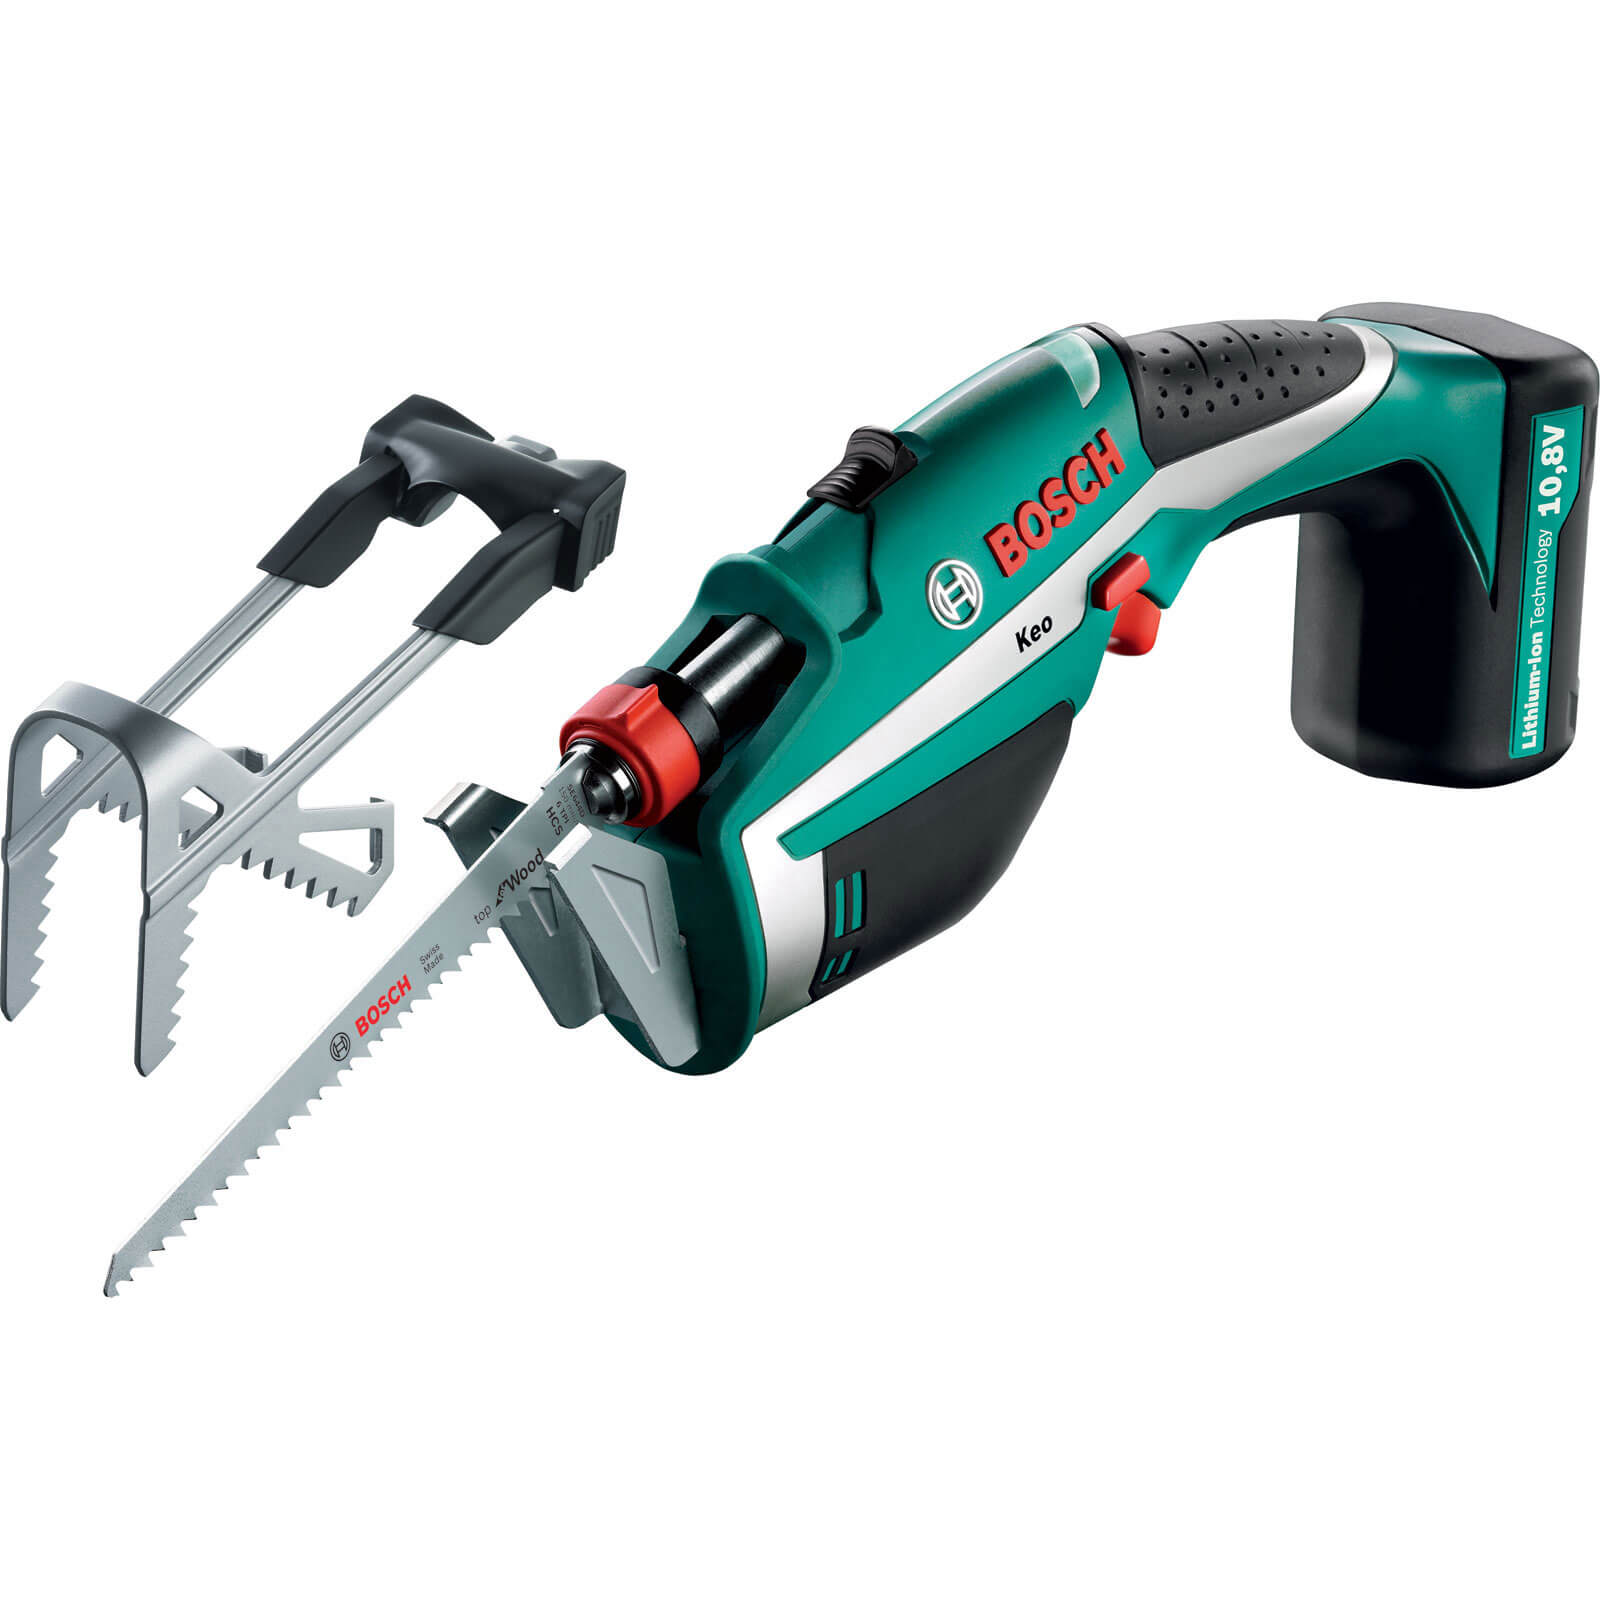 Image of Bosch KEO 10.8v Cordless Reciprocating Pruning Saw 1 x 1.3ah Integrated Li-ion Charger